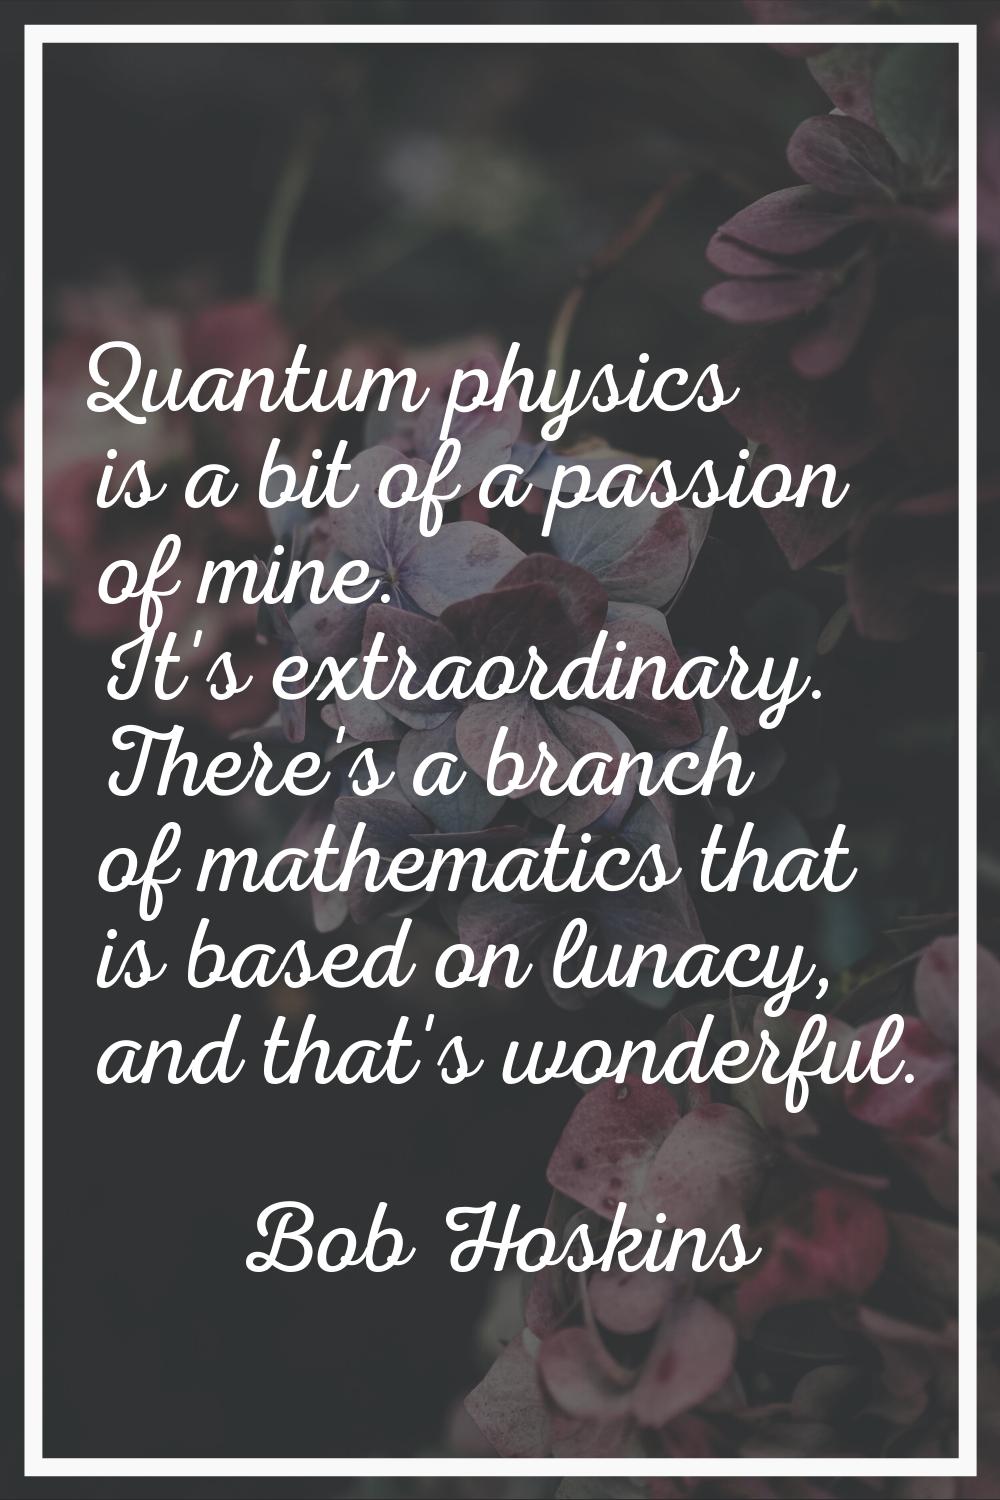 Quantum physics is a bit of a passion of mine. It's extraordinary. There's a branch of mathematics 